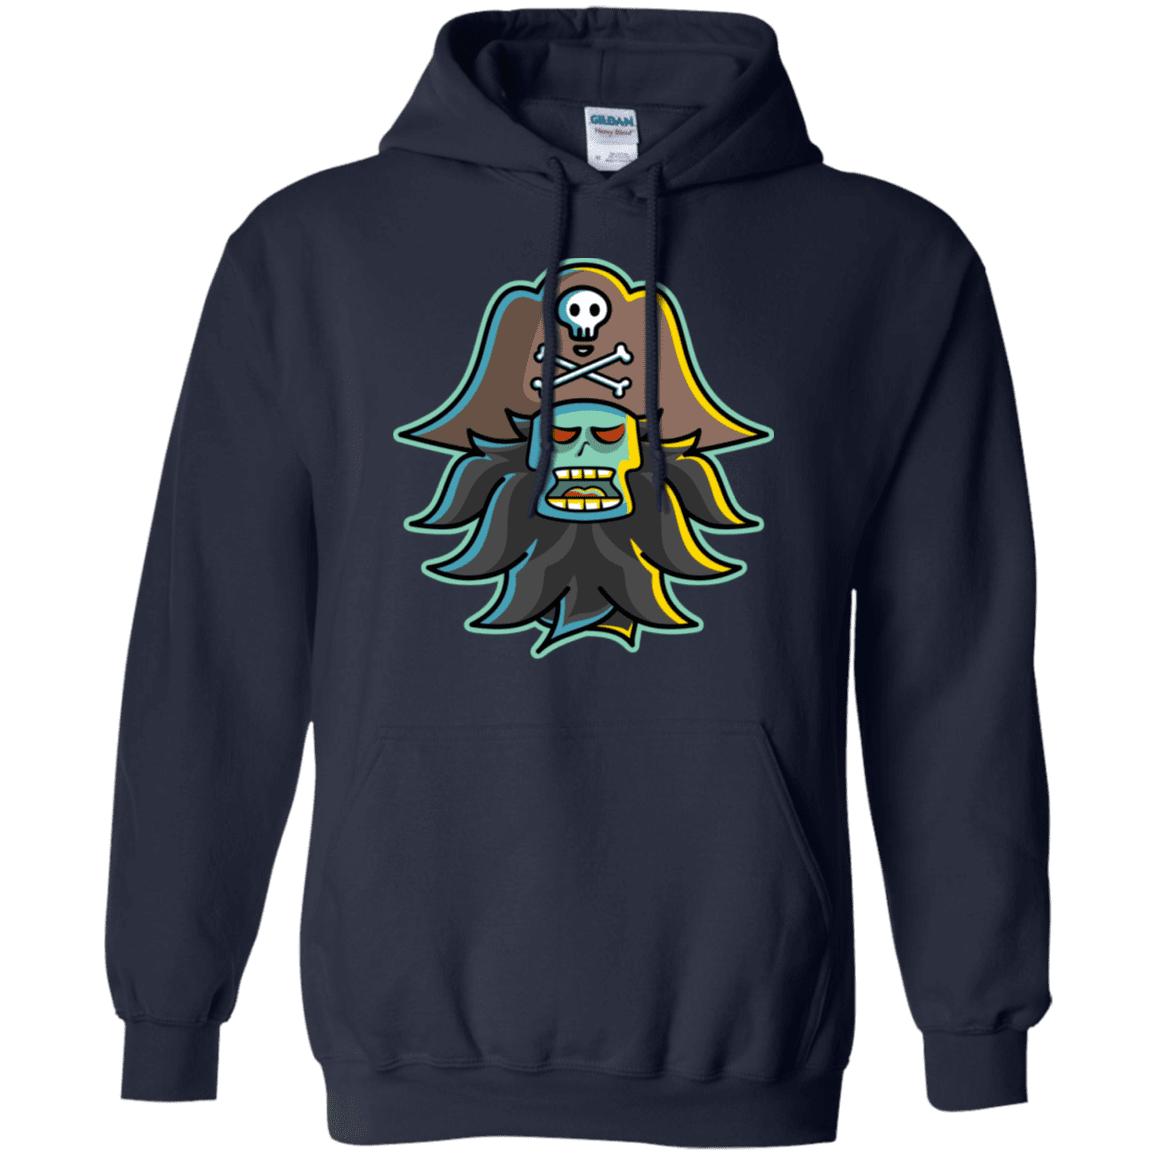 Sweatshirts Navy / S Ghost Pirate LeChuck Pullover Hoodie